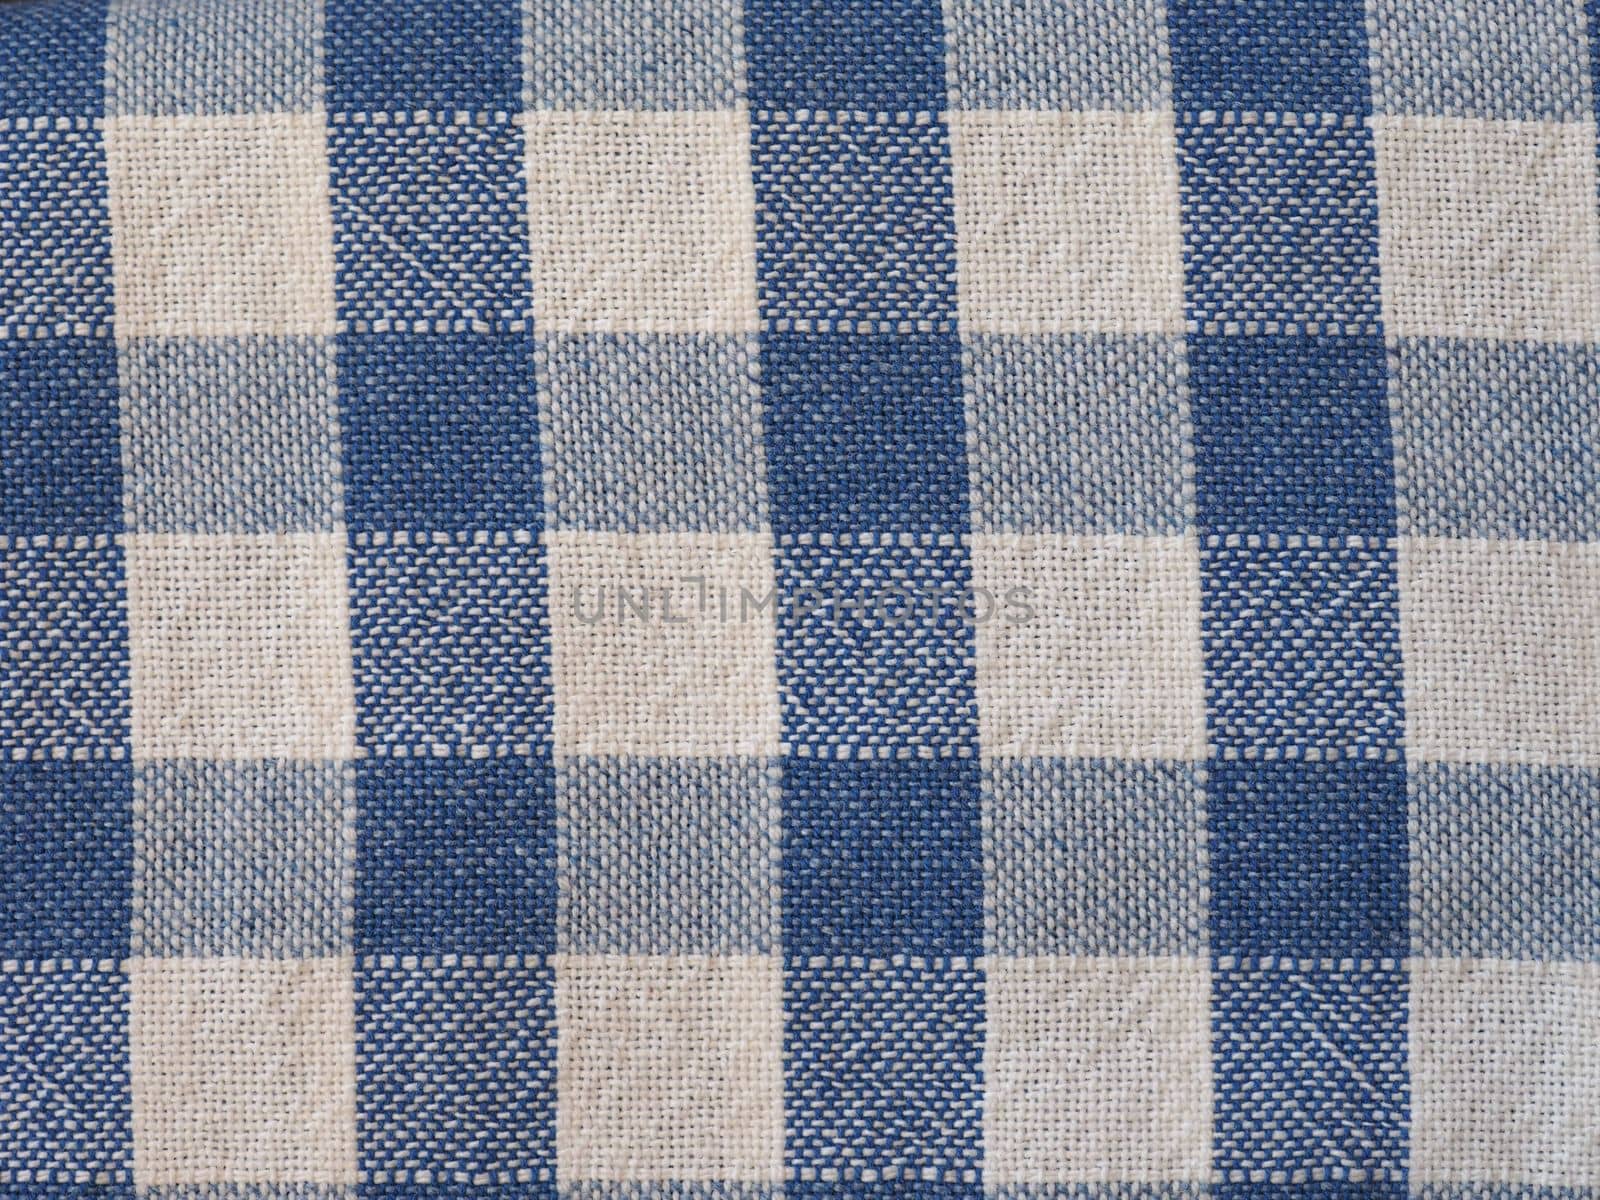 blue and white checkered fabric background by claudiodivizia